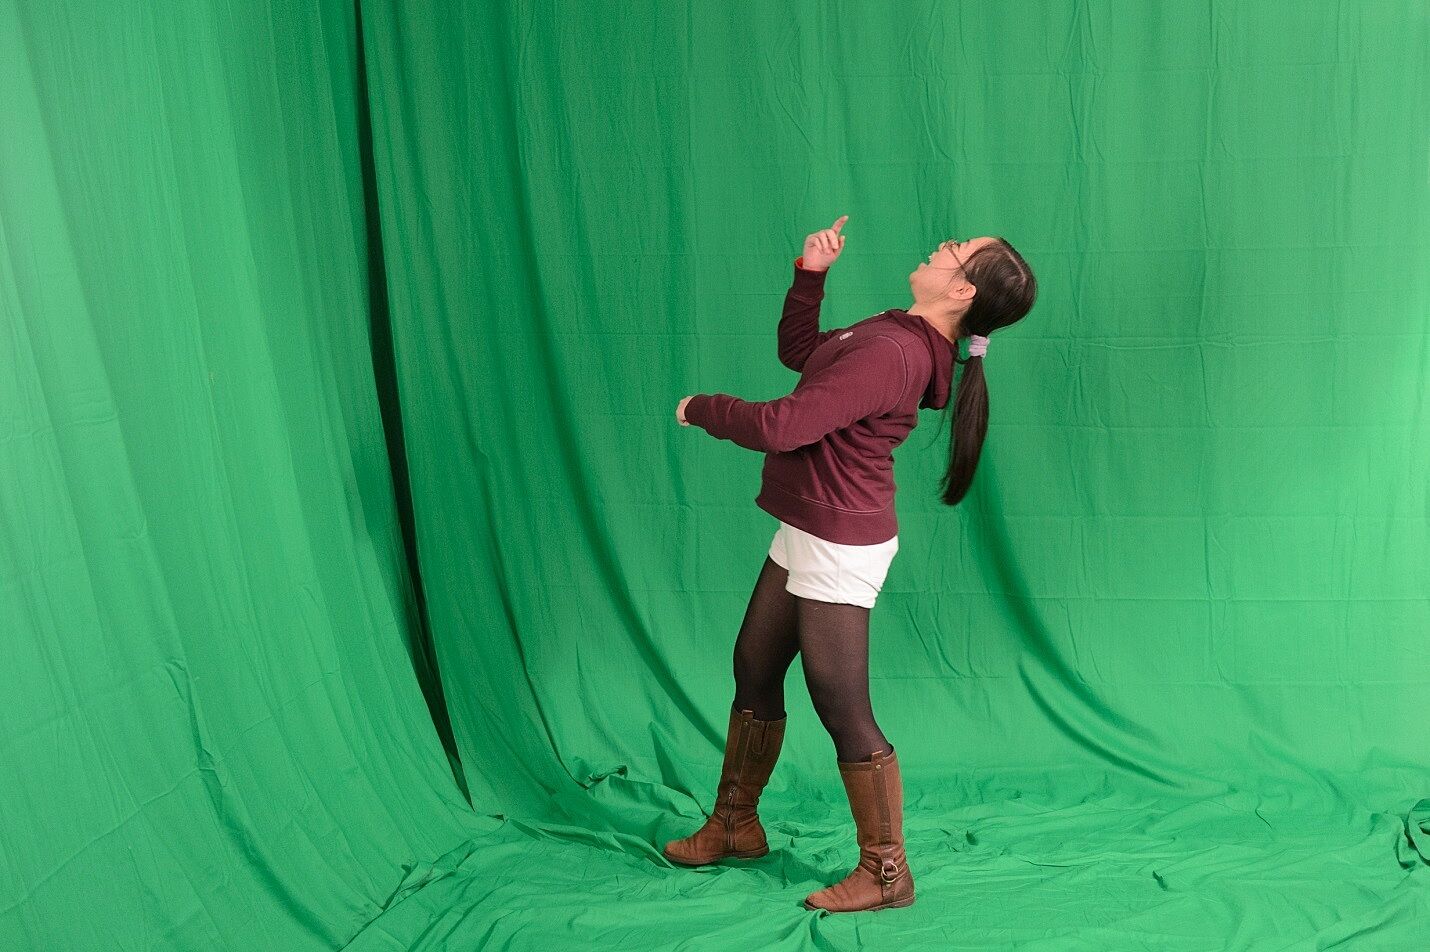 Y I Artist Sally performs in front of the green screen